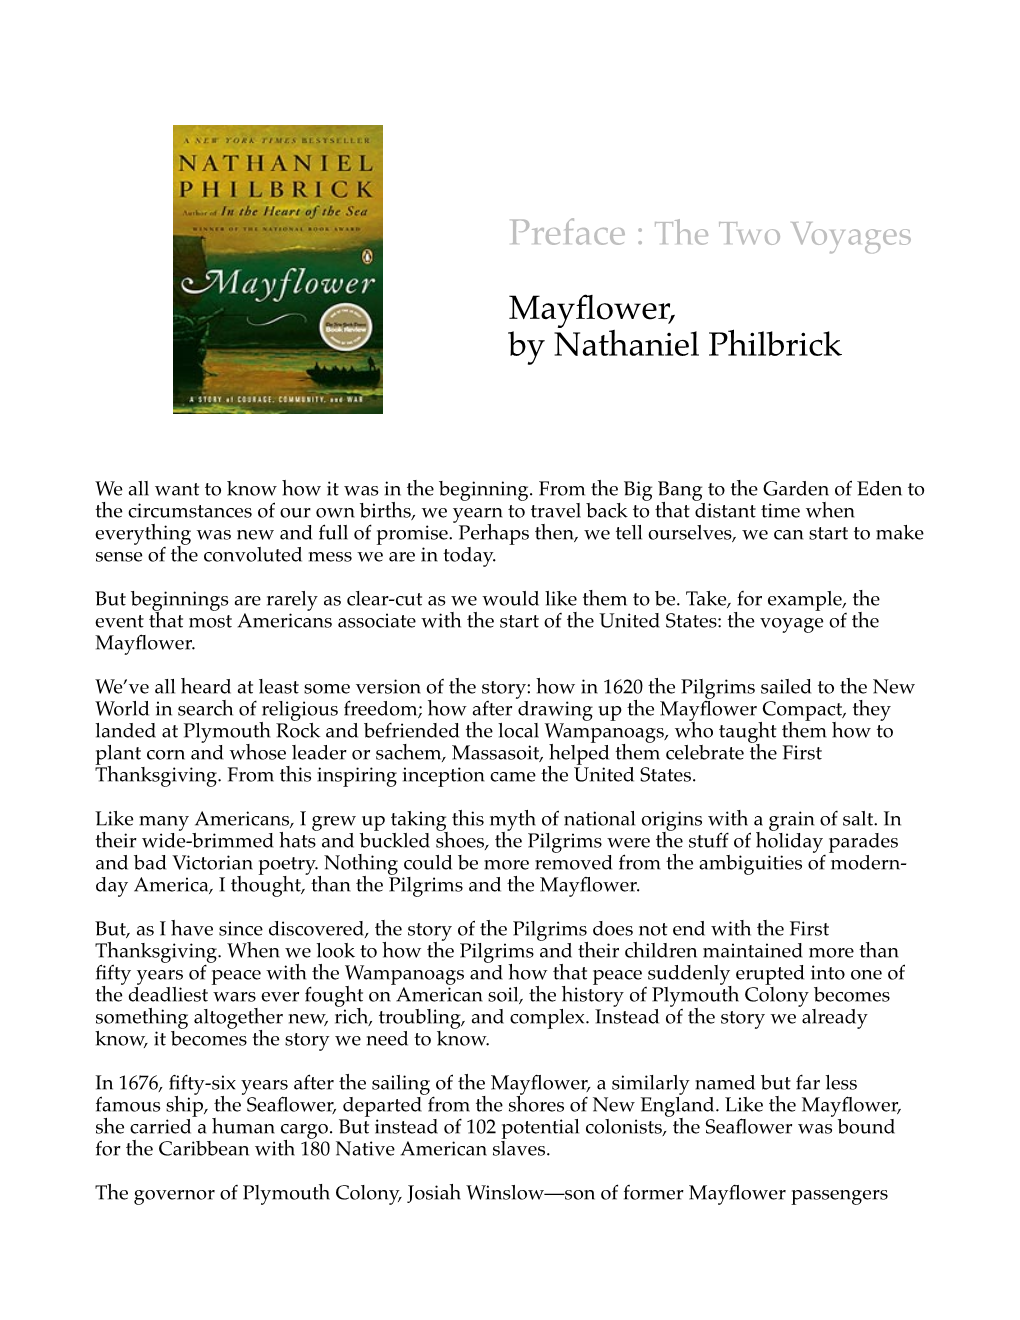 Preface : the Two Voyages